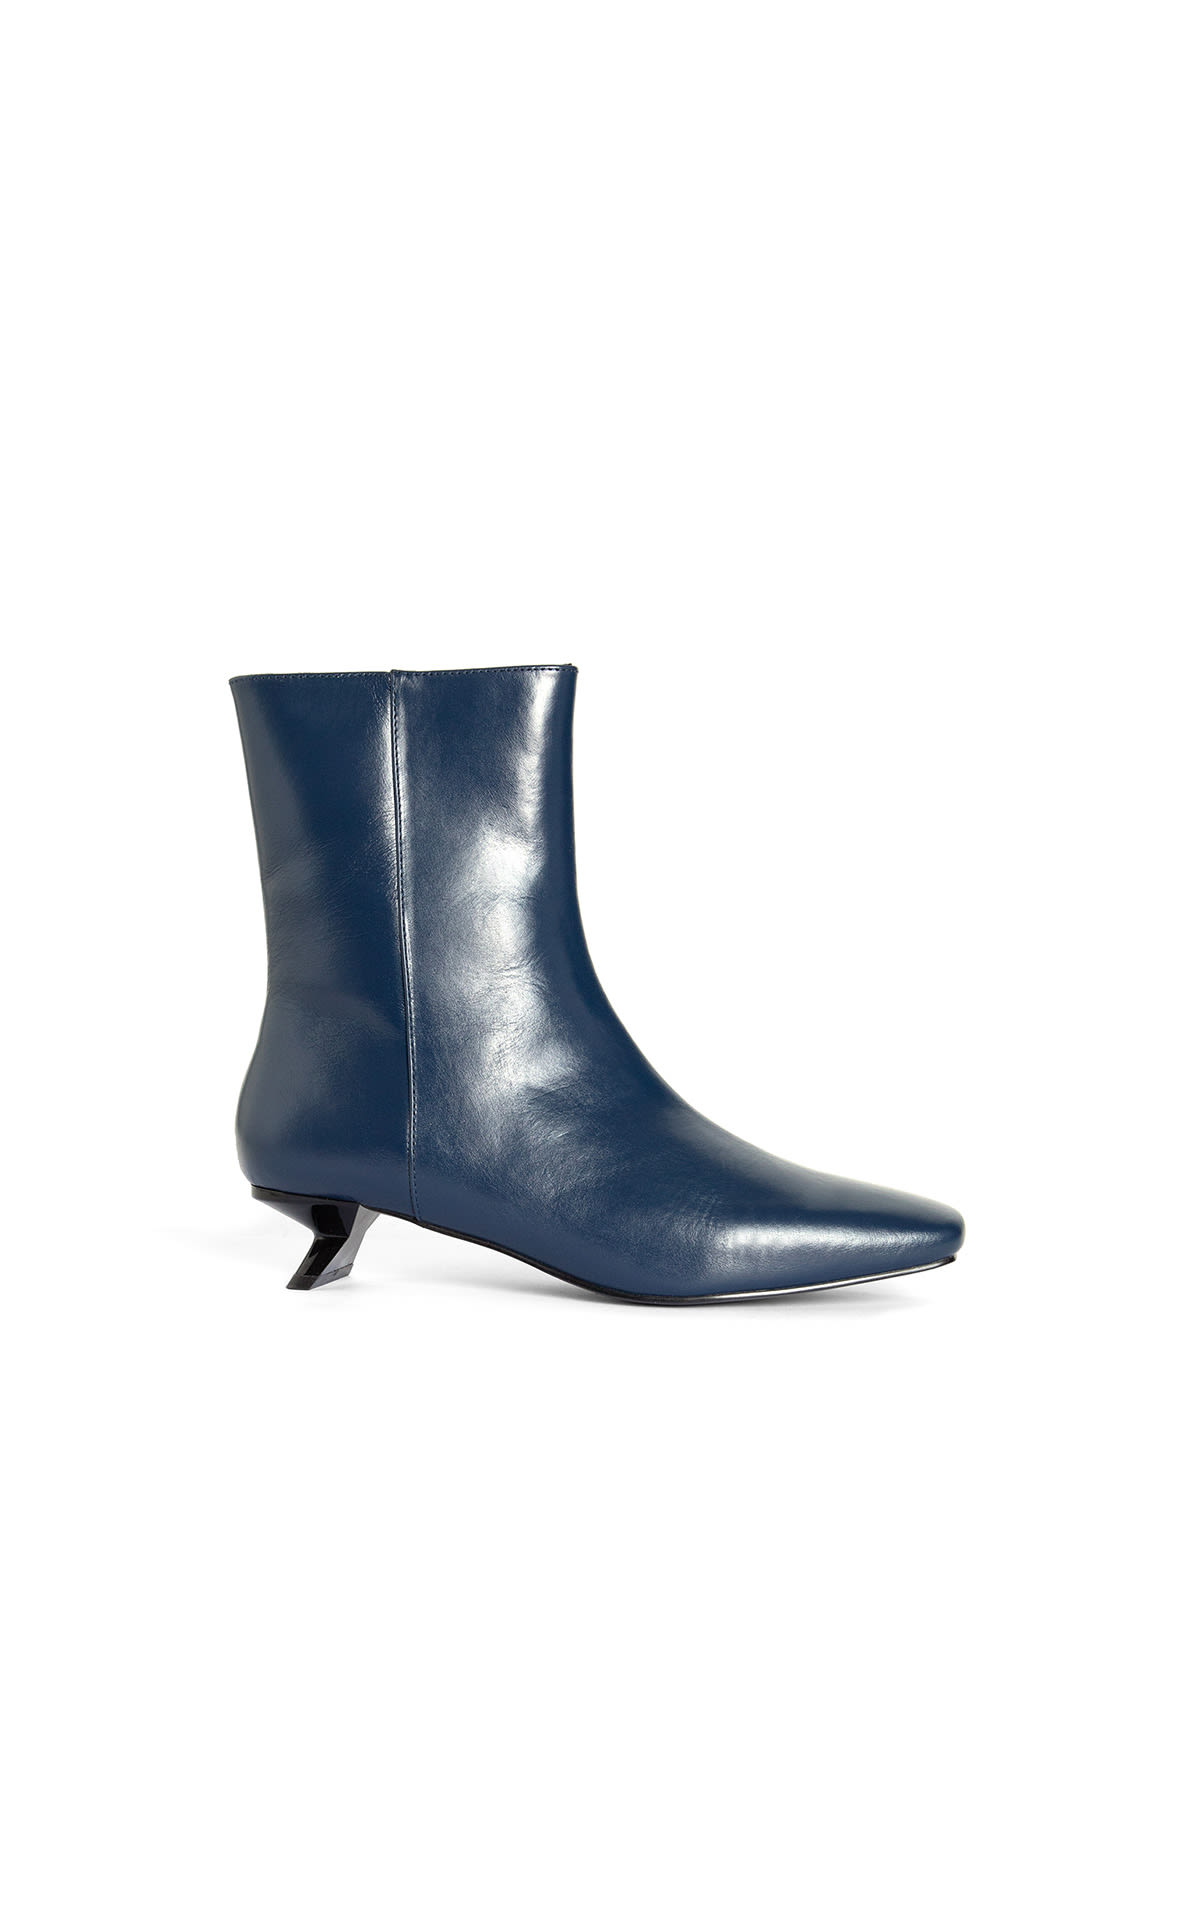 Blue leather ankle boot Adolfo Dominguez